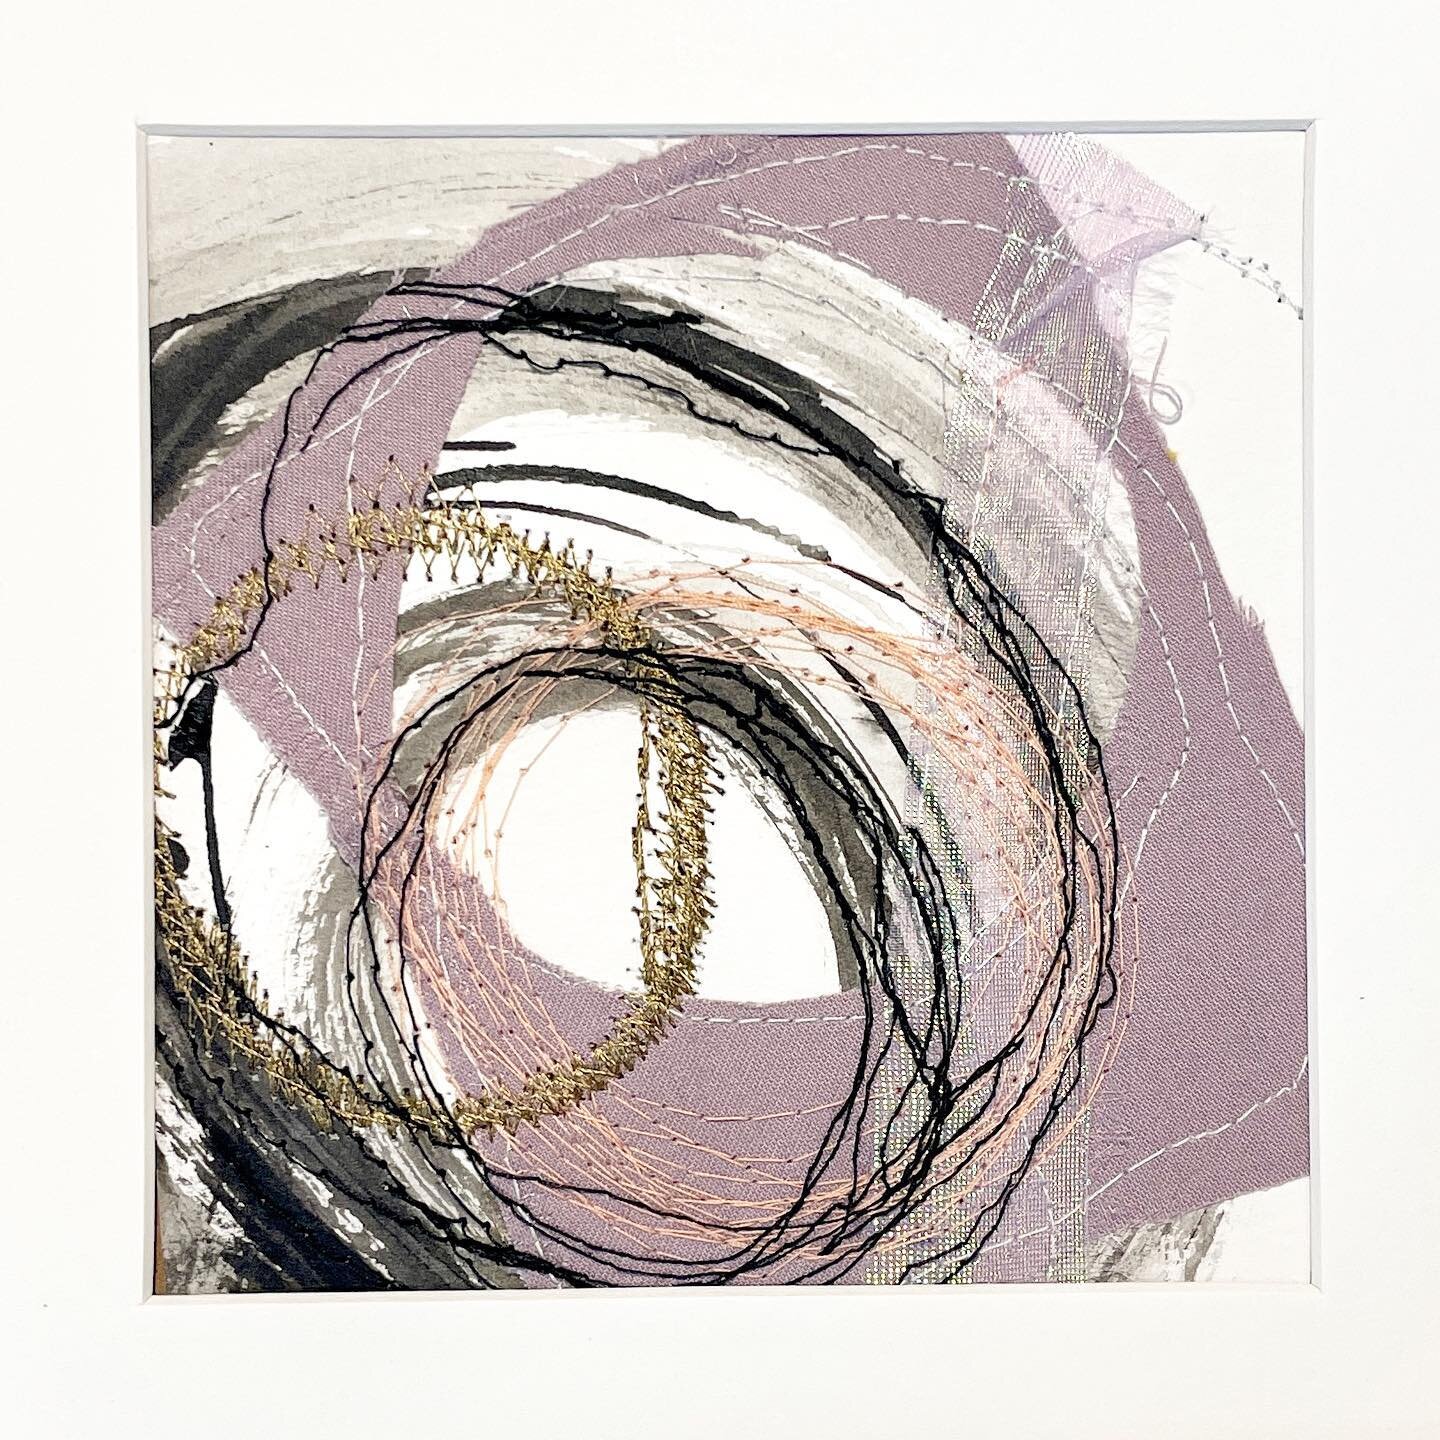 New &ldquo;moment&rdquo; framed pieces are blooming for #cherrycreekartsfestival July 4th weekend. Each is hand made and one of a kind. Available to purchase at the show ❤️💁🏻&zwj;♀️
.
.
#fiberart #ink #thread #sewn #collageart